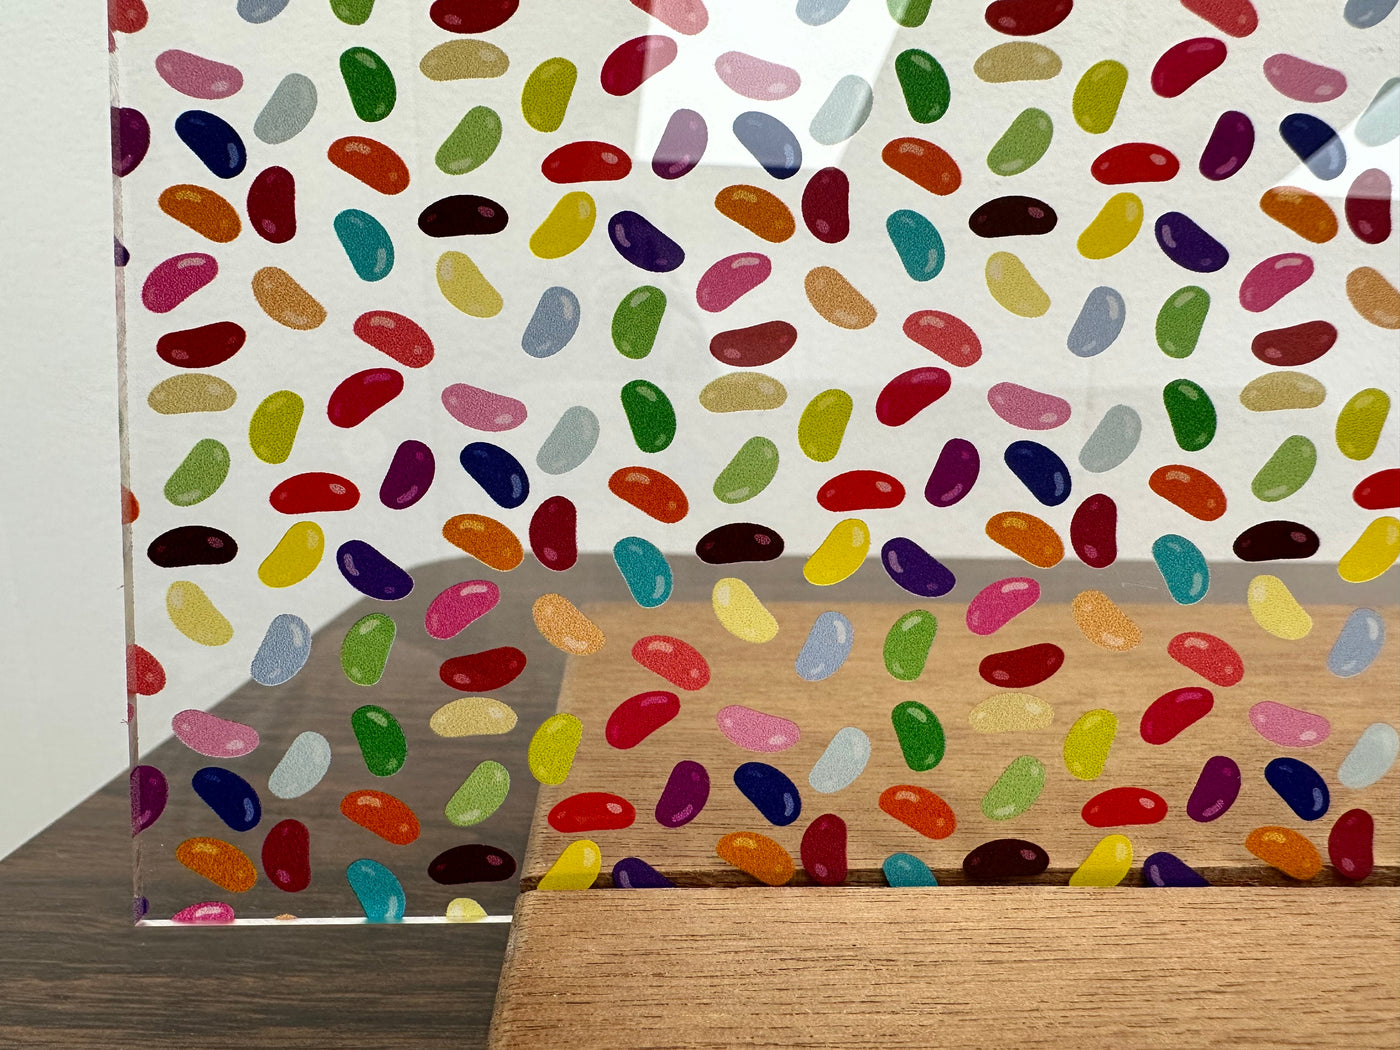 PatternPly® Scattered Jellybeans